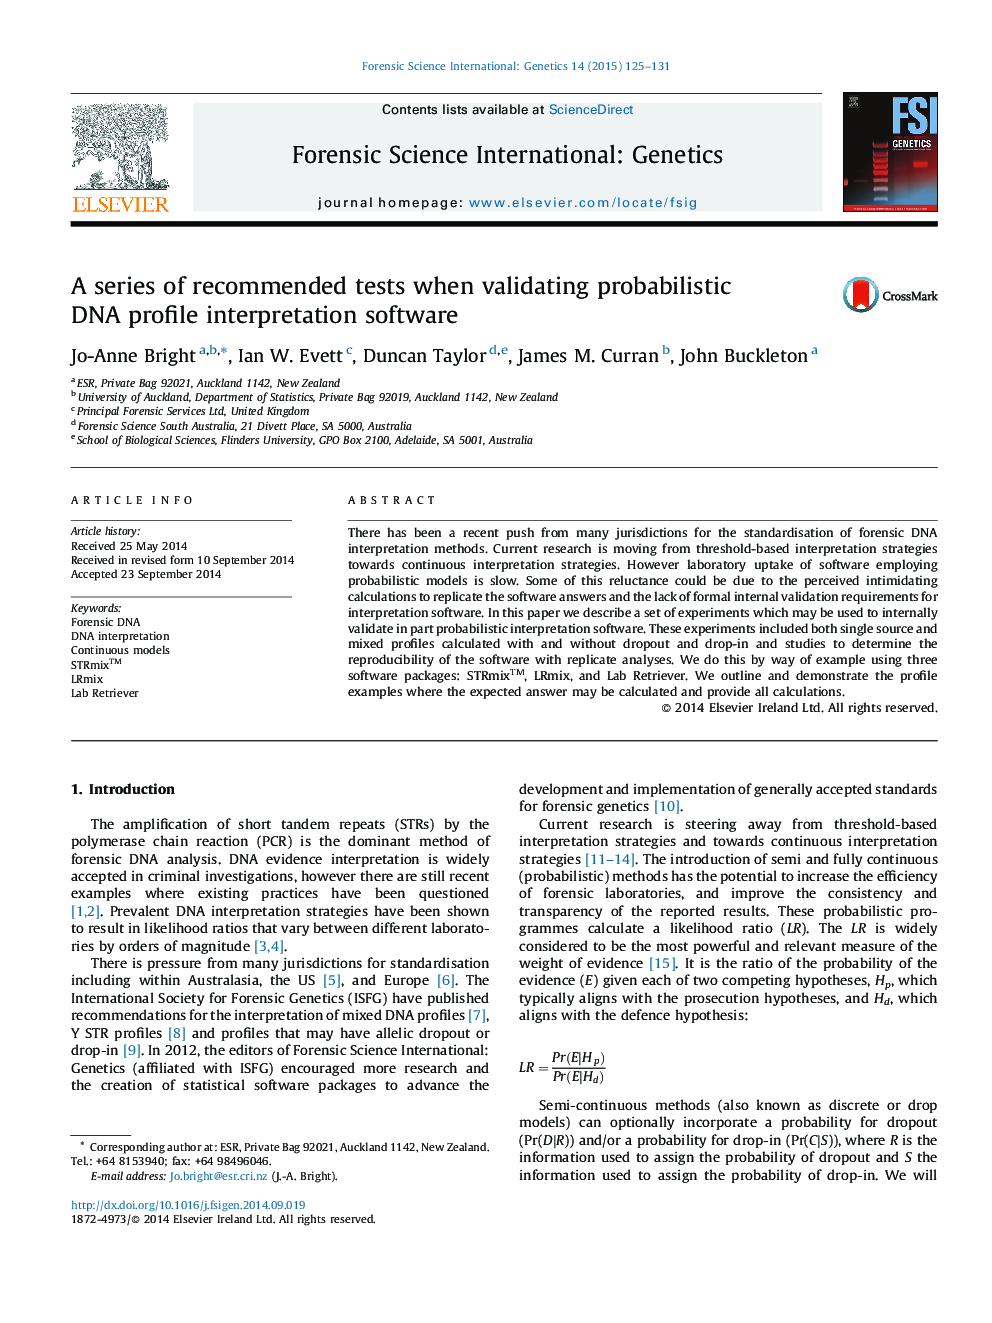 A series of recommended tests when validating probabilistic DNA profile interpretation software